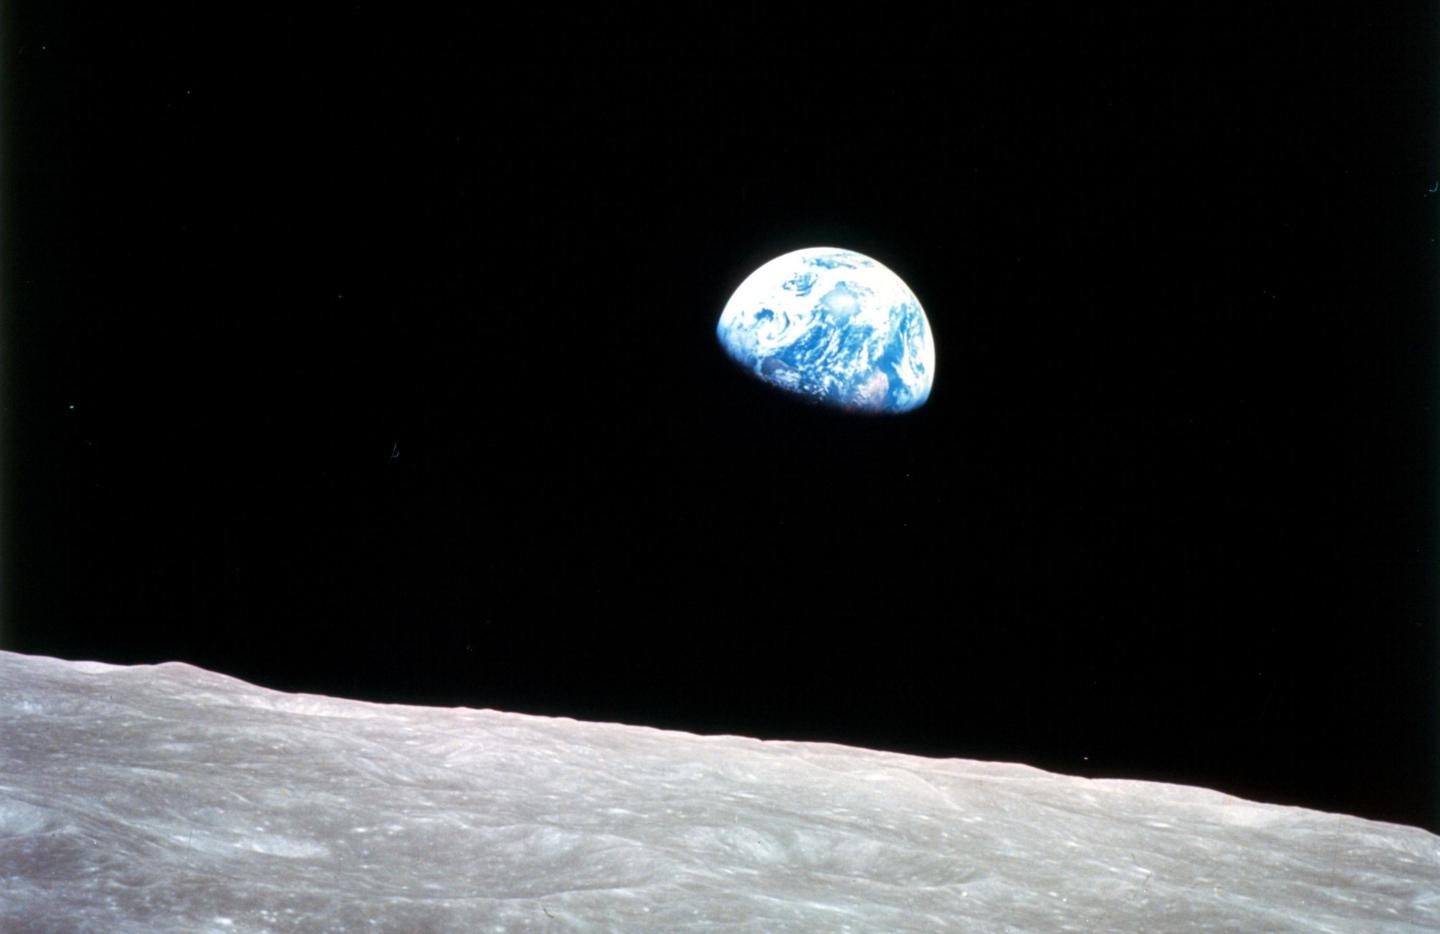 Earth from the Moon